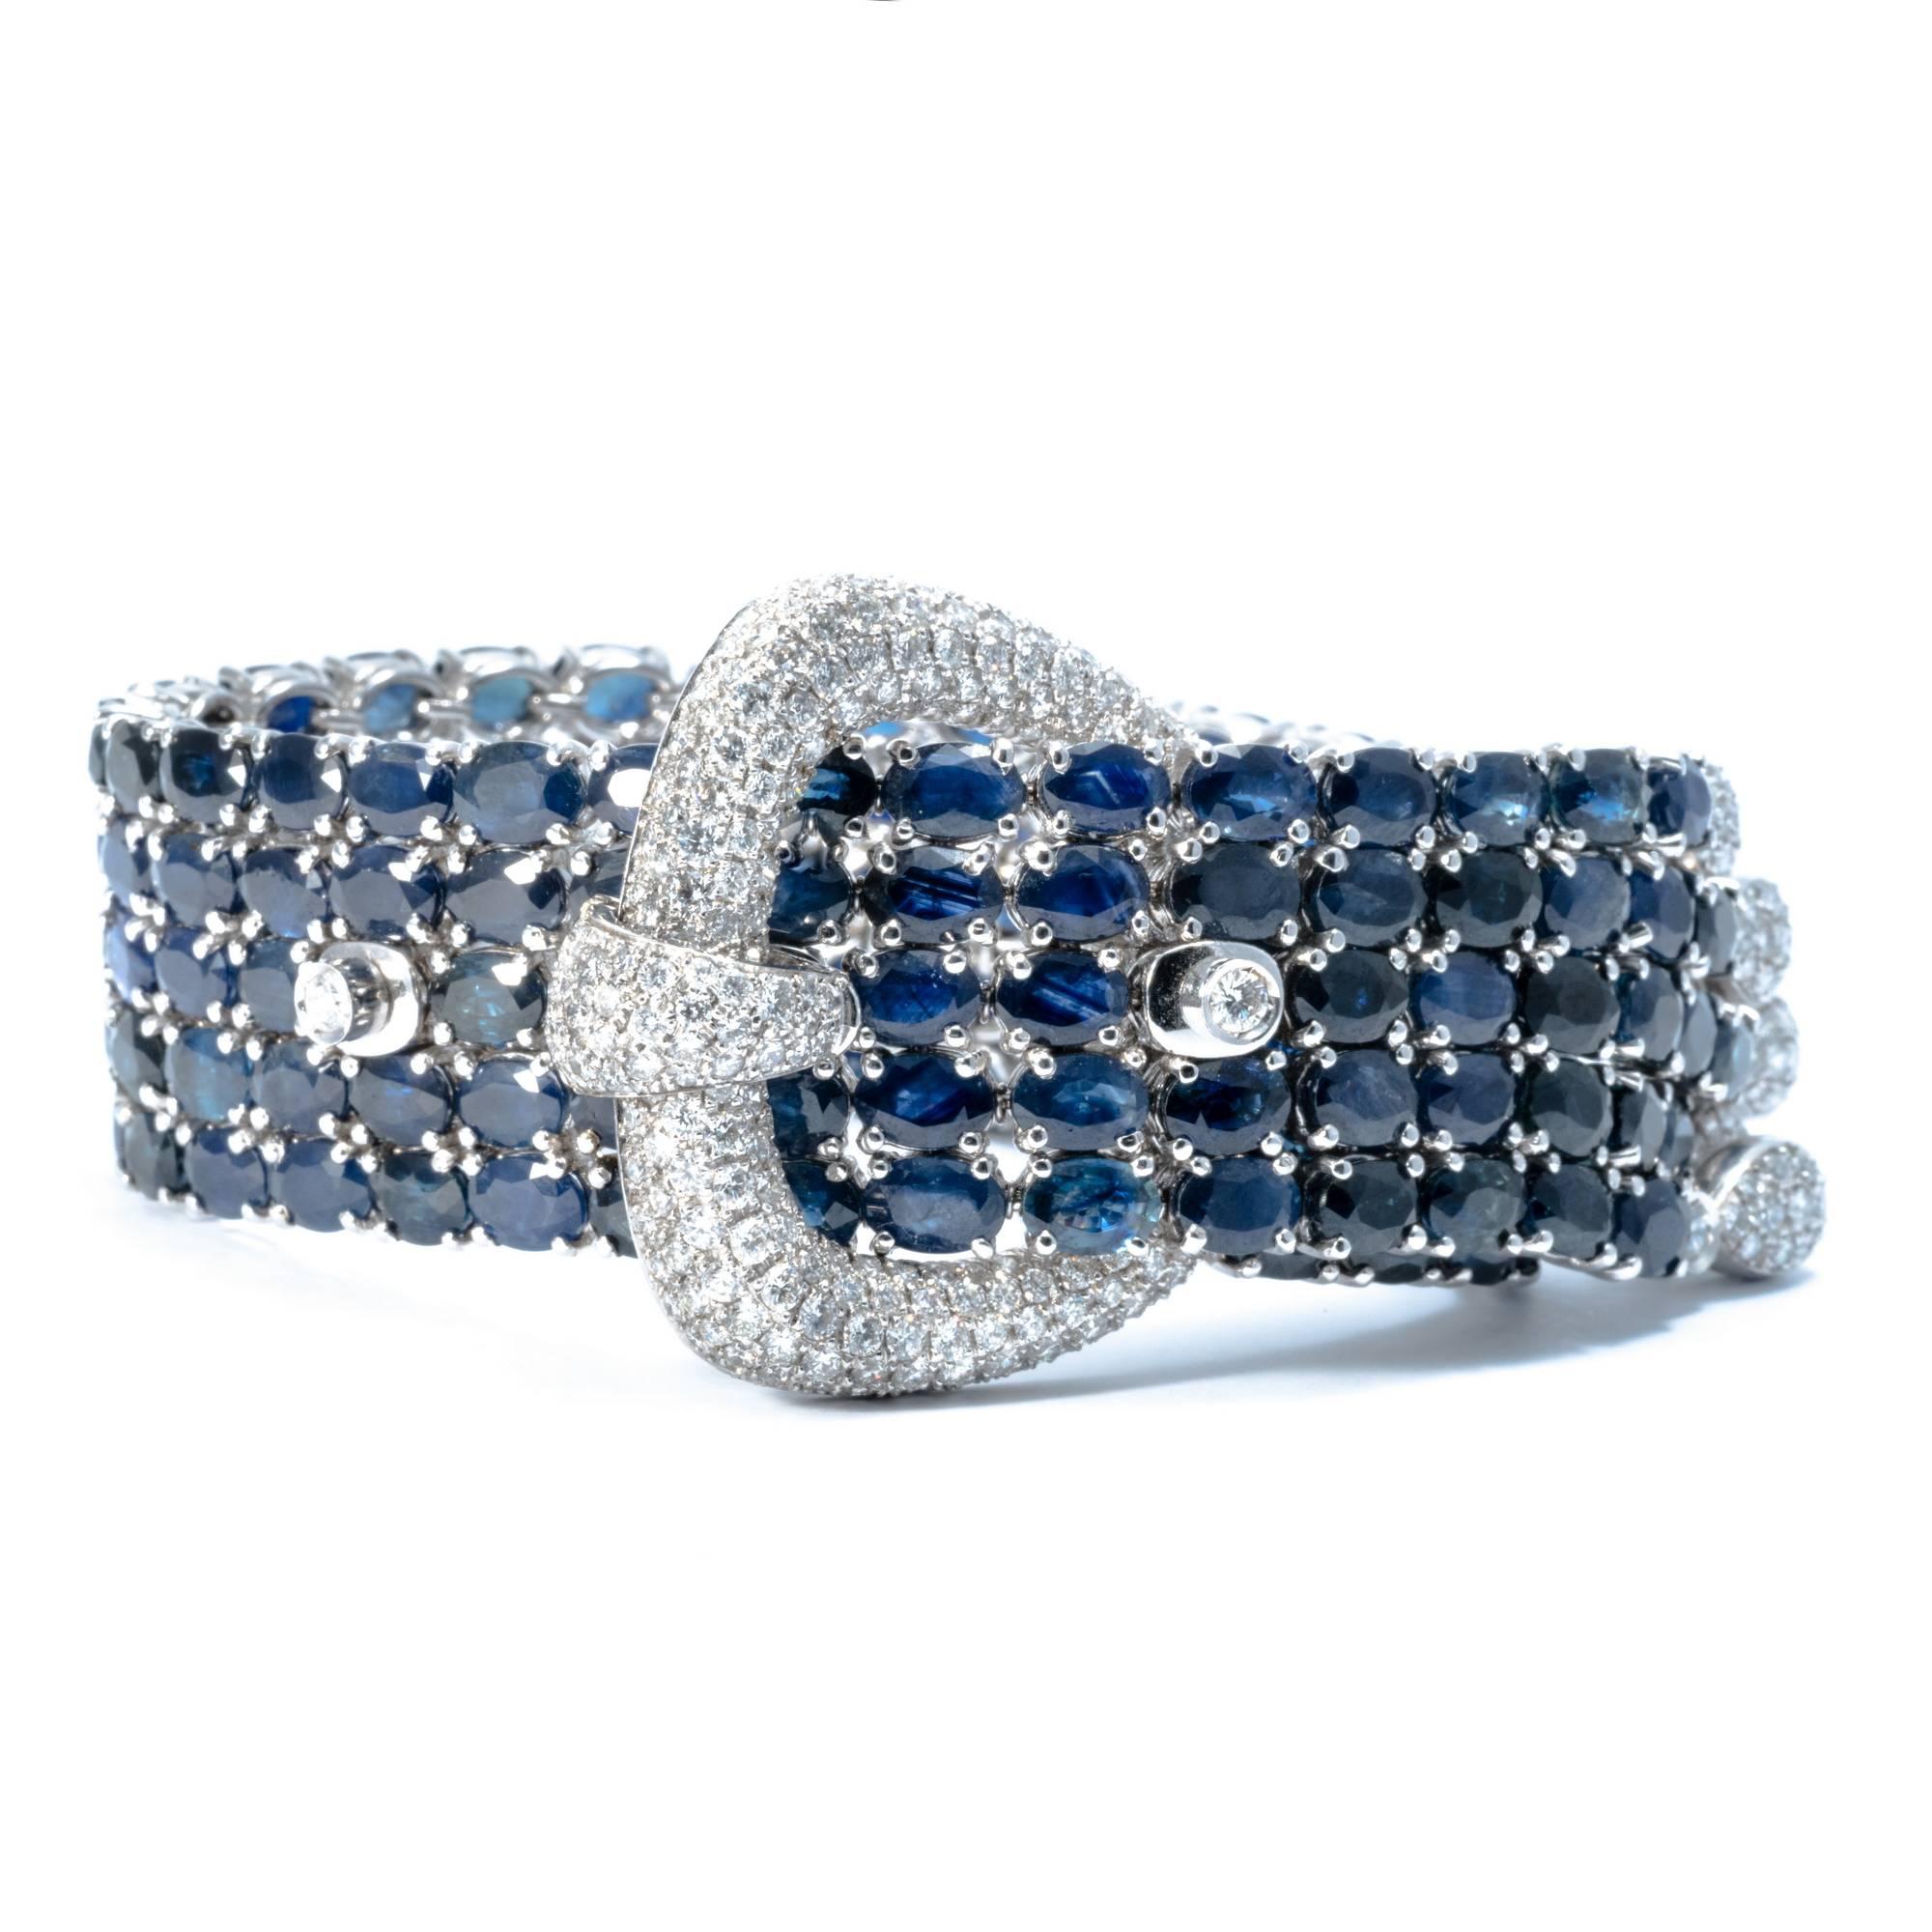 Ansuini sapphires and diamonds buckle bangle in white gold 18 k is composed of 5 threads of sapphires, enlightened by a buckle and a cascade of drops, all encrusted with diamonds. It’s  extraordinary construction and beautiful stones make this